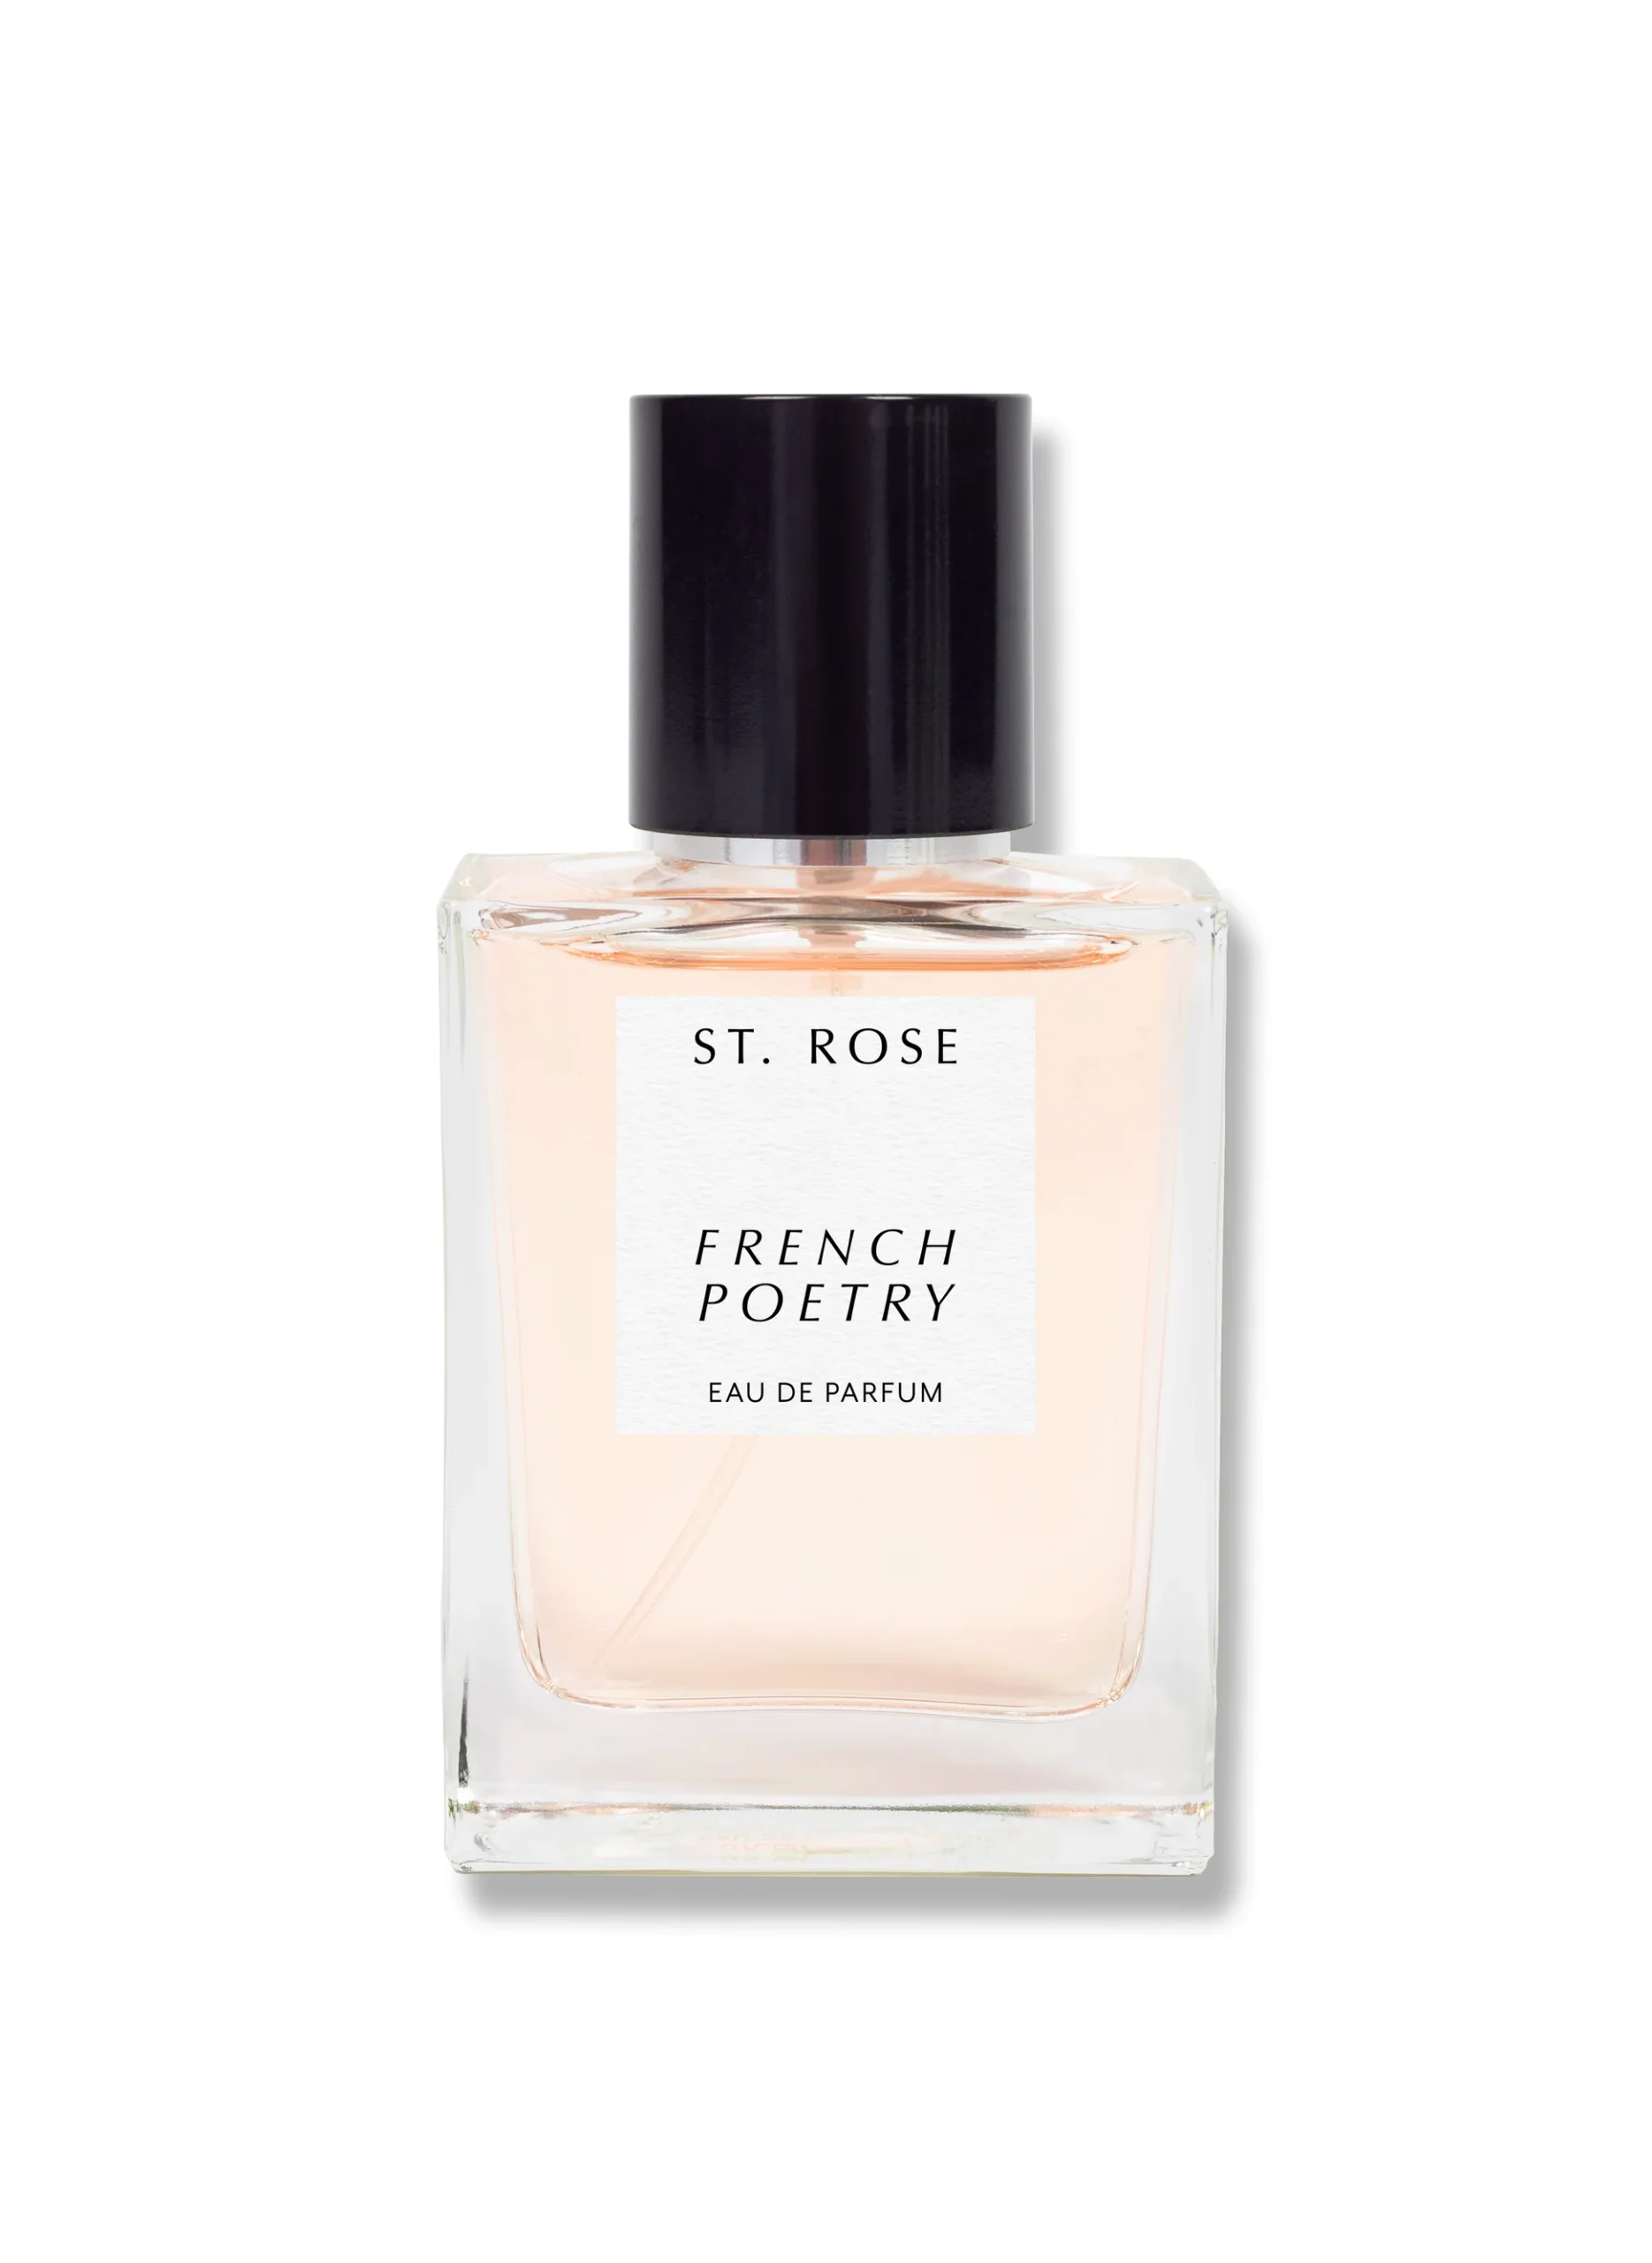 St. Rose French Poetry is one of the go-to fragrances if you want an opulent warm floral scent